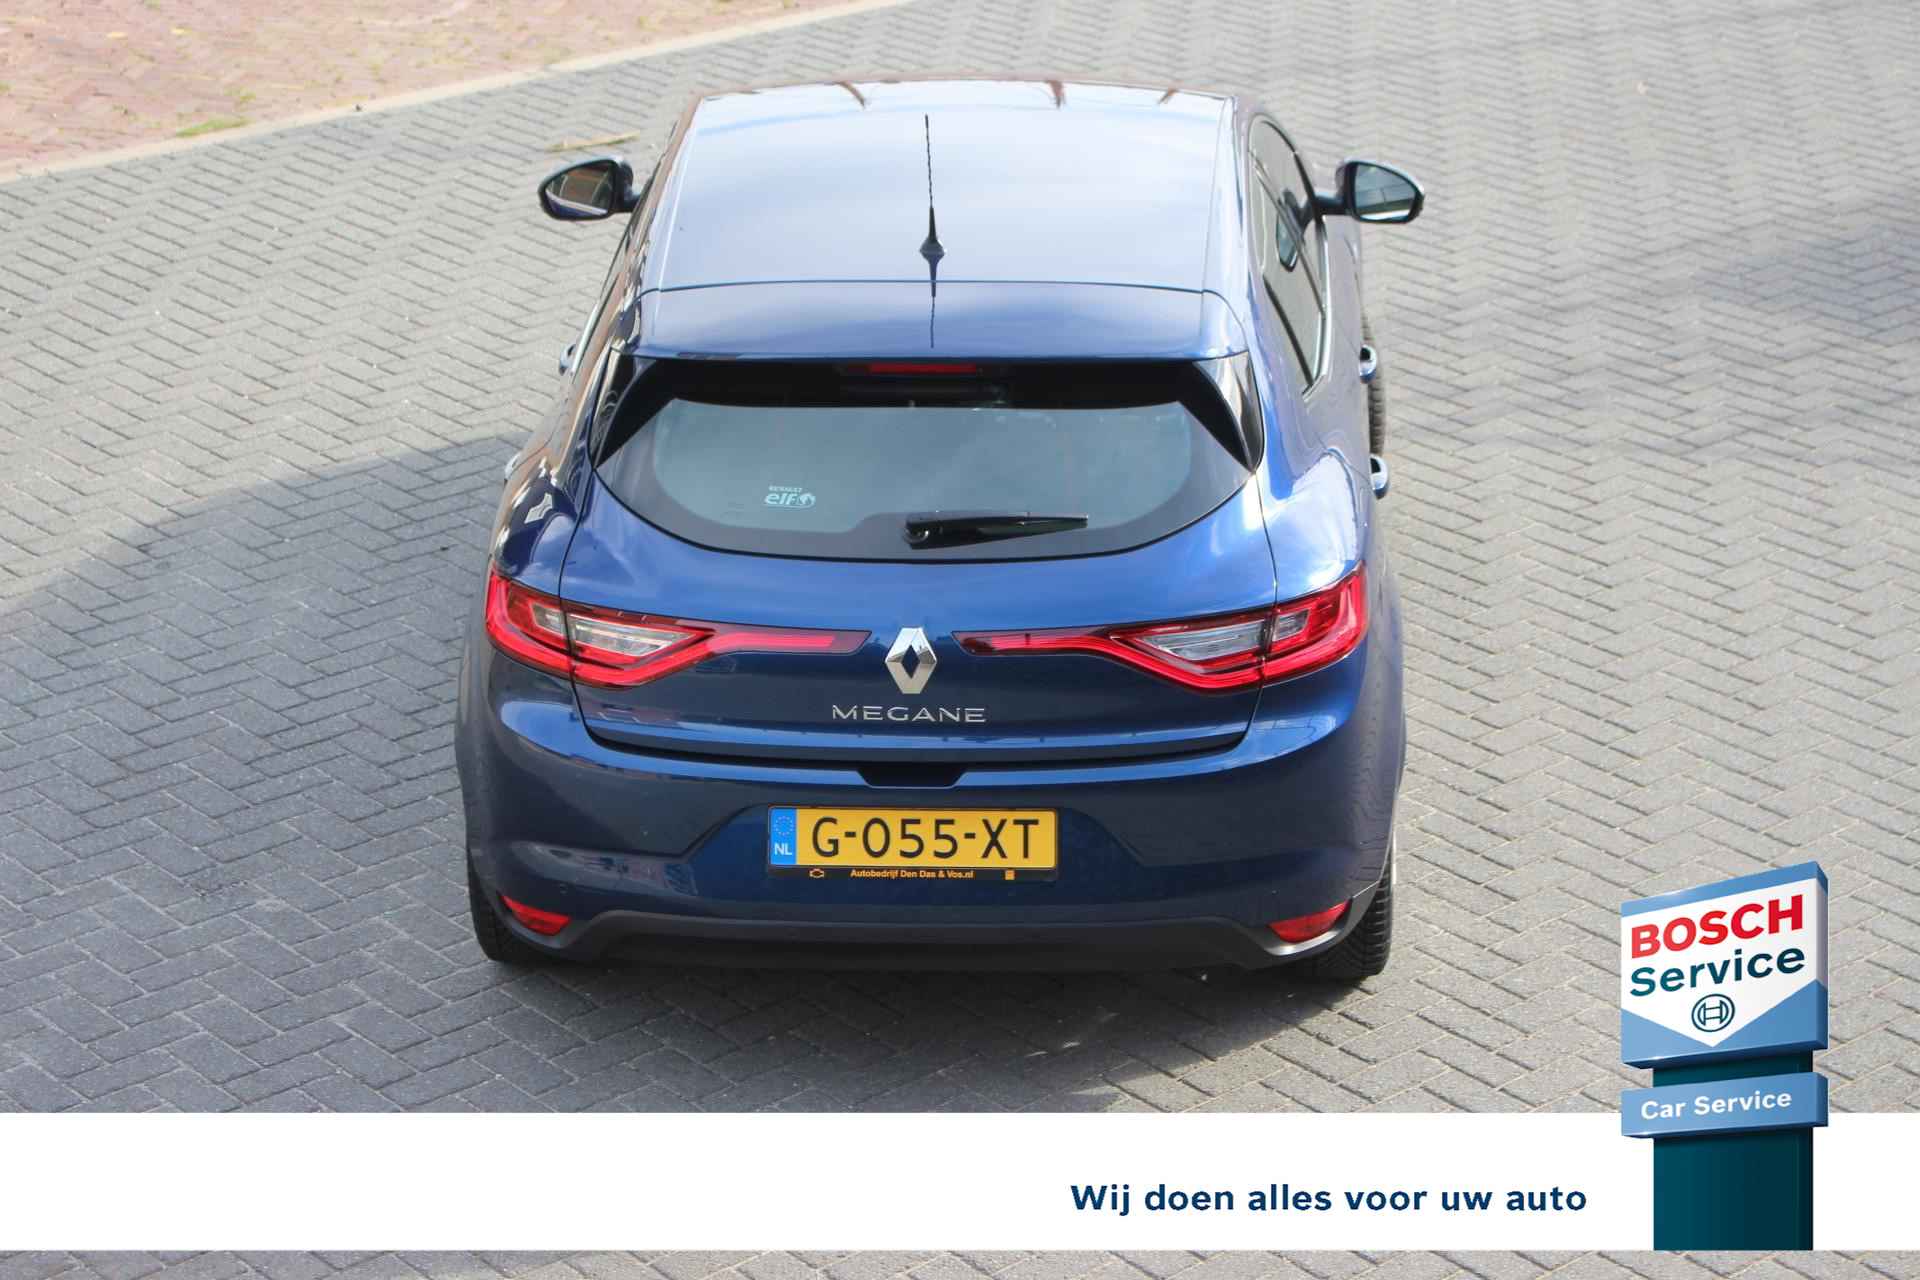 Renault Mégane 1.3 TCe Zen Dab+ audio Climate + cruise control Navi PDC achter Led verlichting voor + achter - 18/34